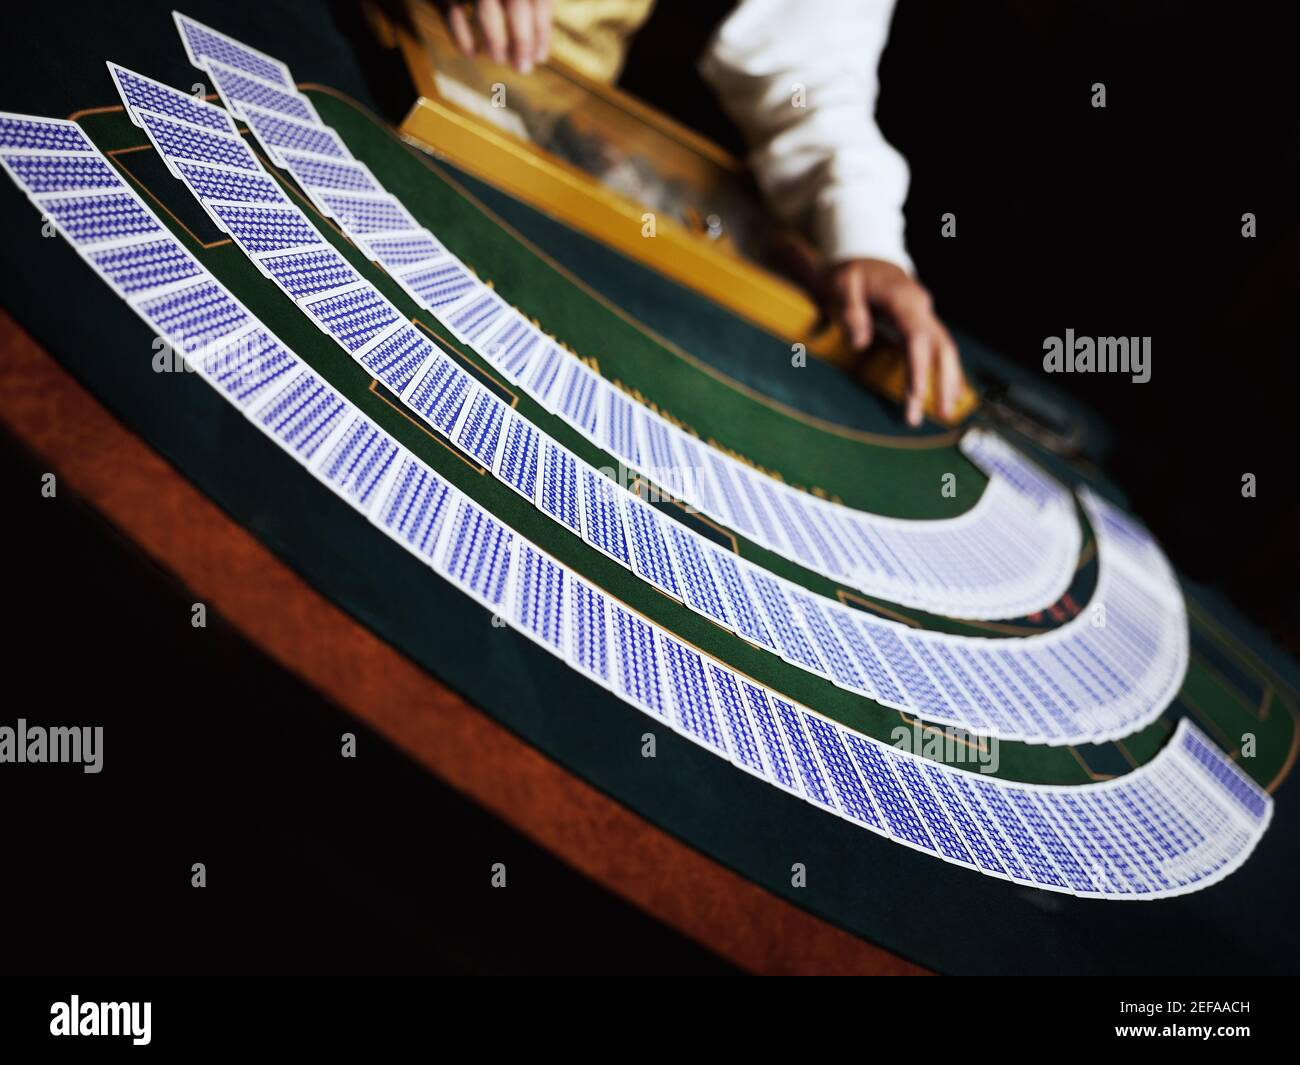 Casino worker dealing with playing cards on a gambling table Stock Photo